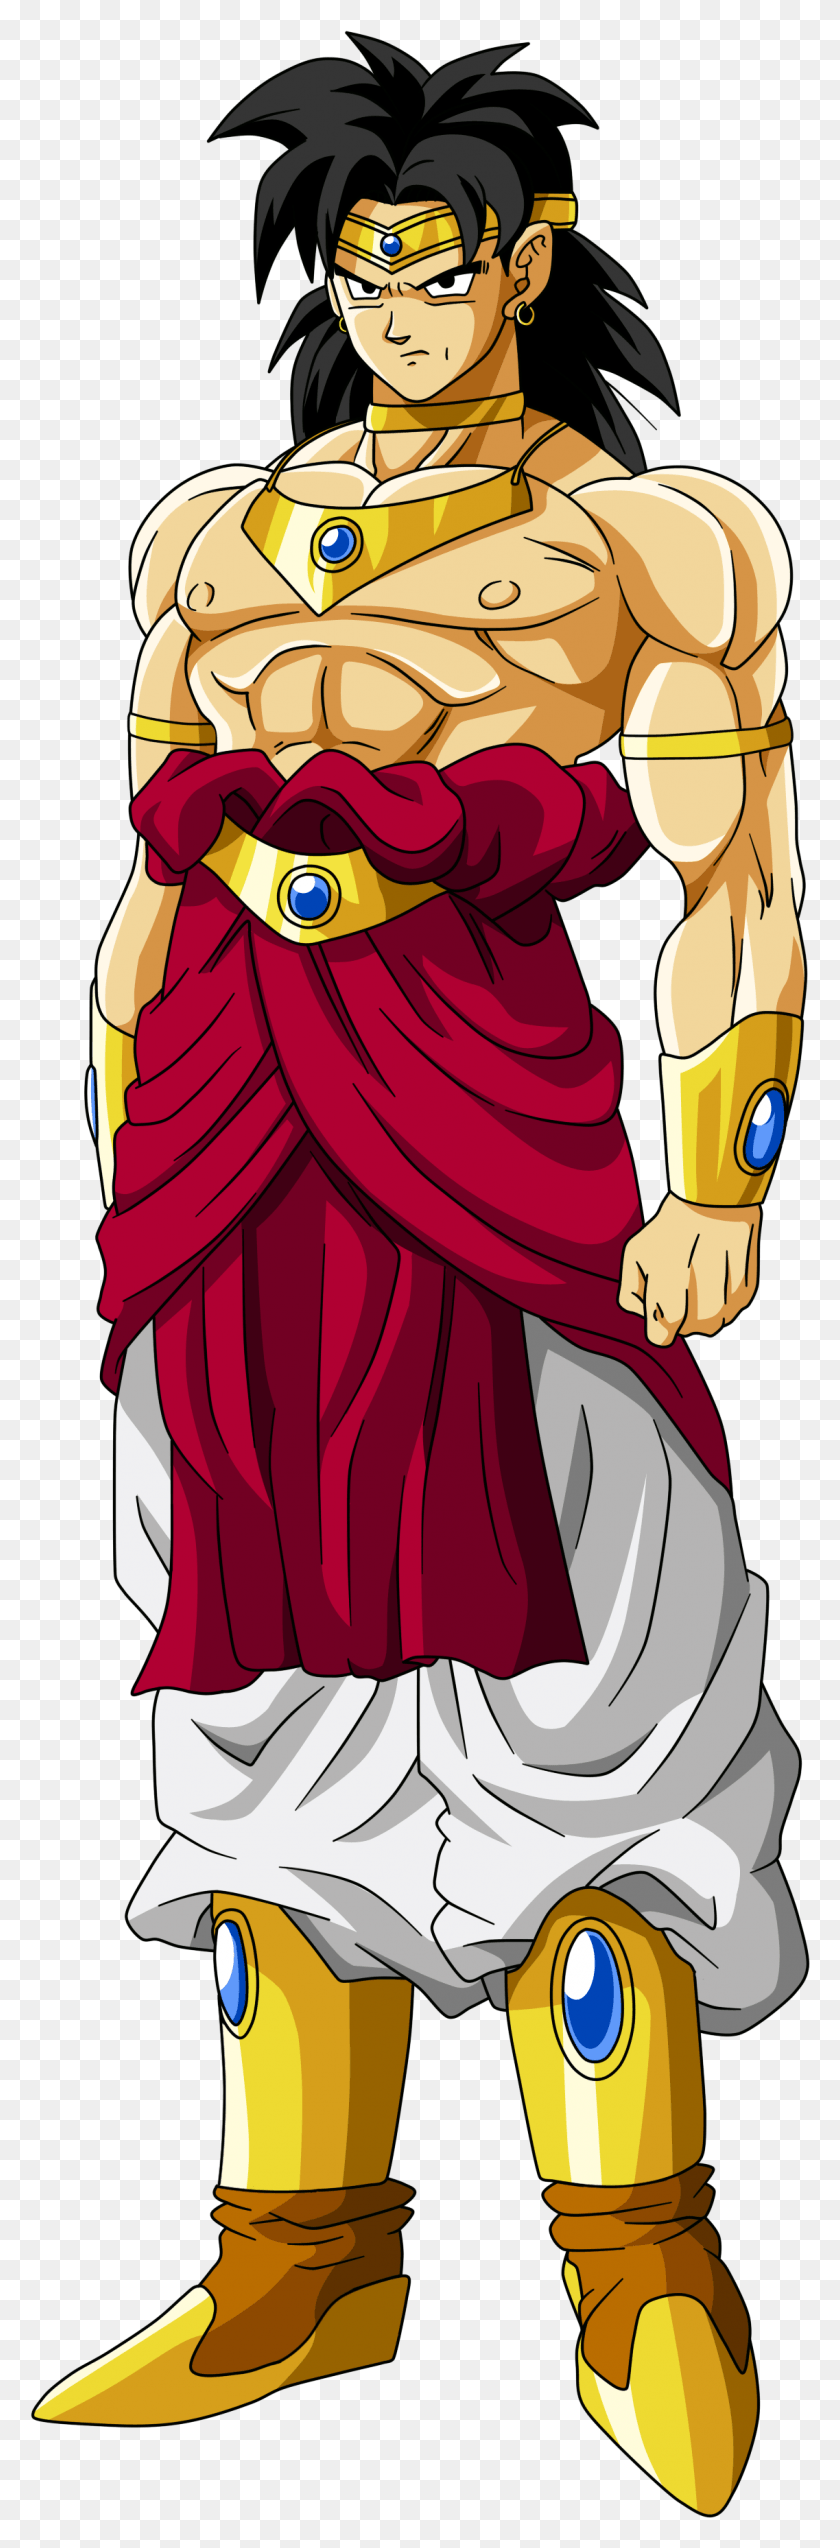 1137x3627 Image Broly Villains Wiki Fandom Powered By Wikia Dragon Ball Z Broccoli, Clothing, Apparel HD PNG Download